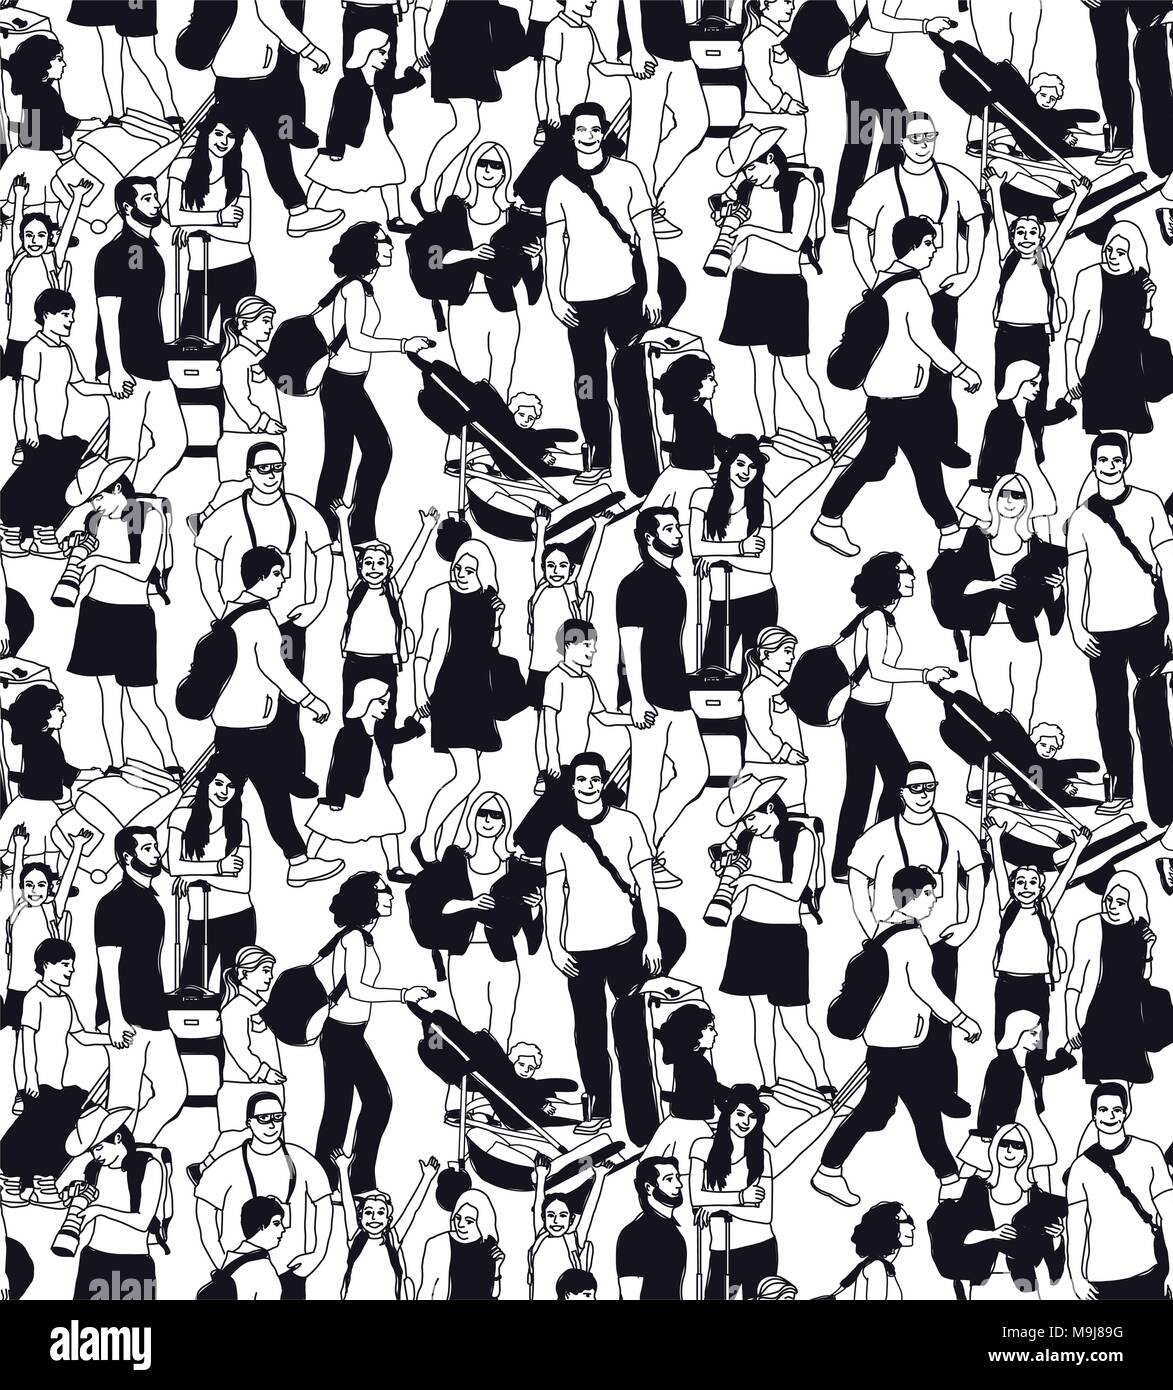 Family people travel crowd seamless pattern black and white. Stock Vector